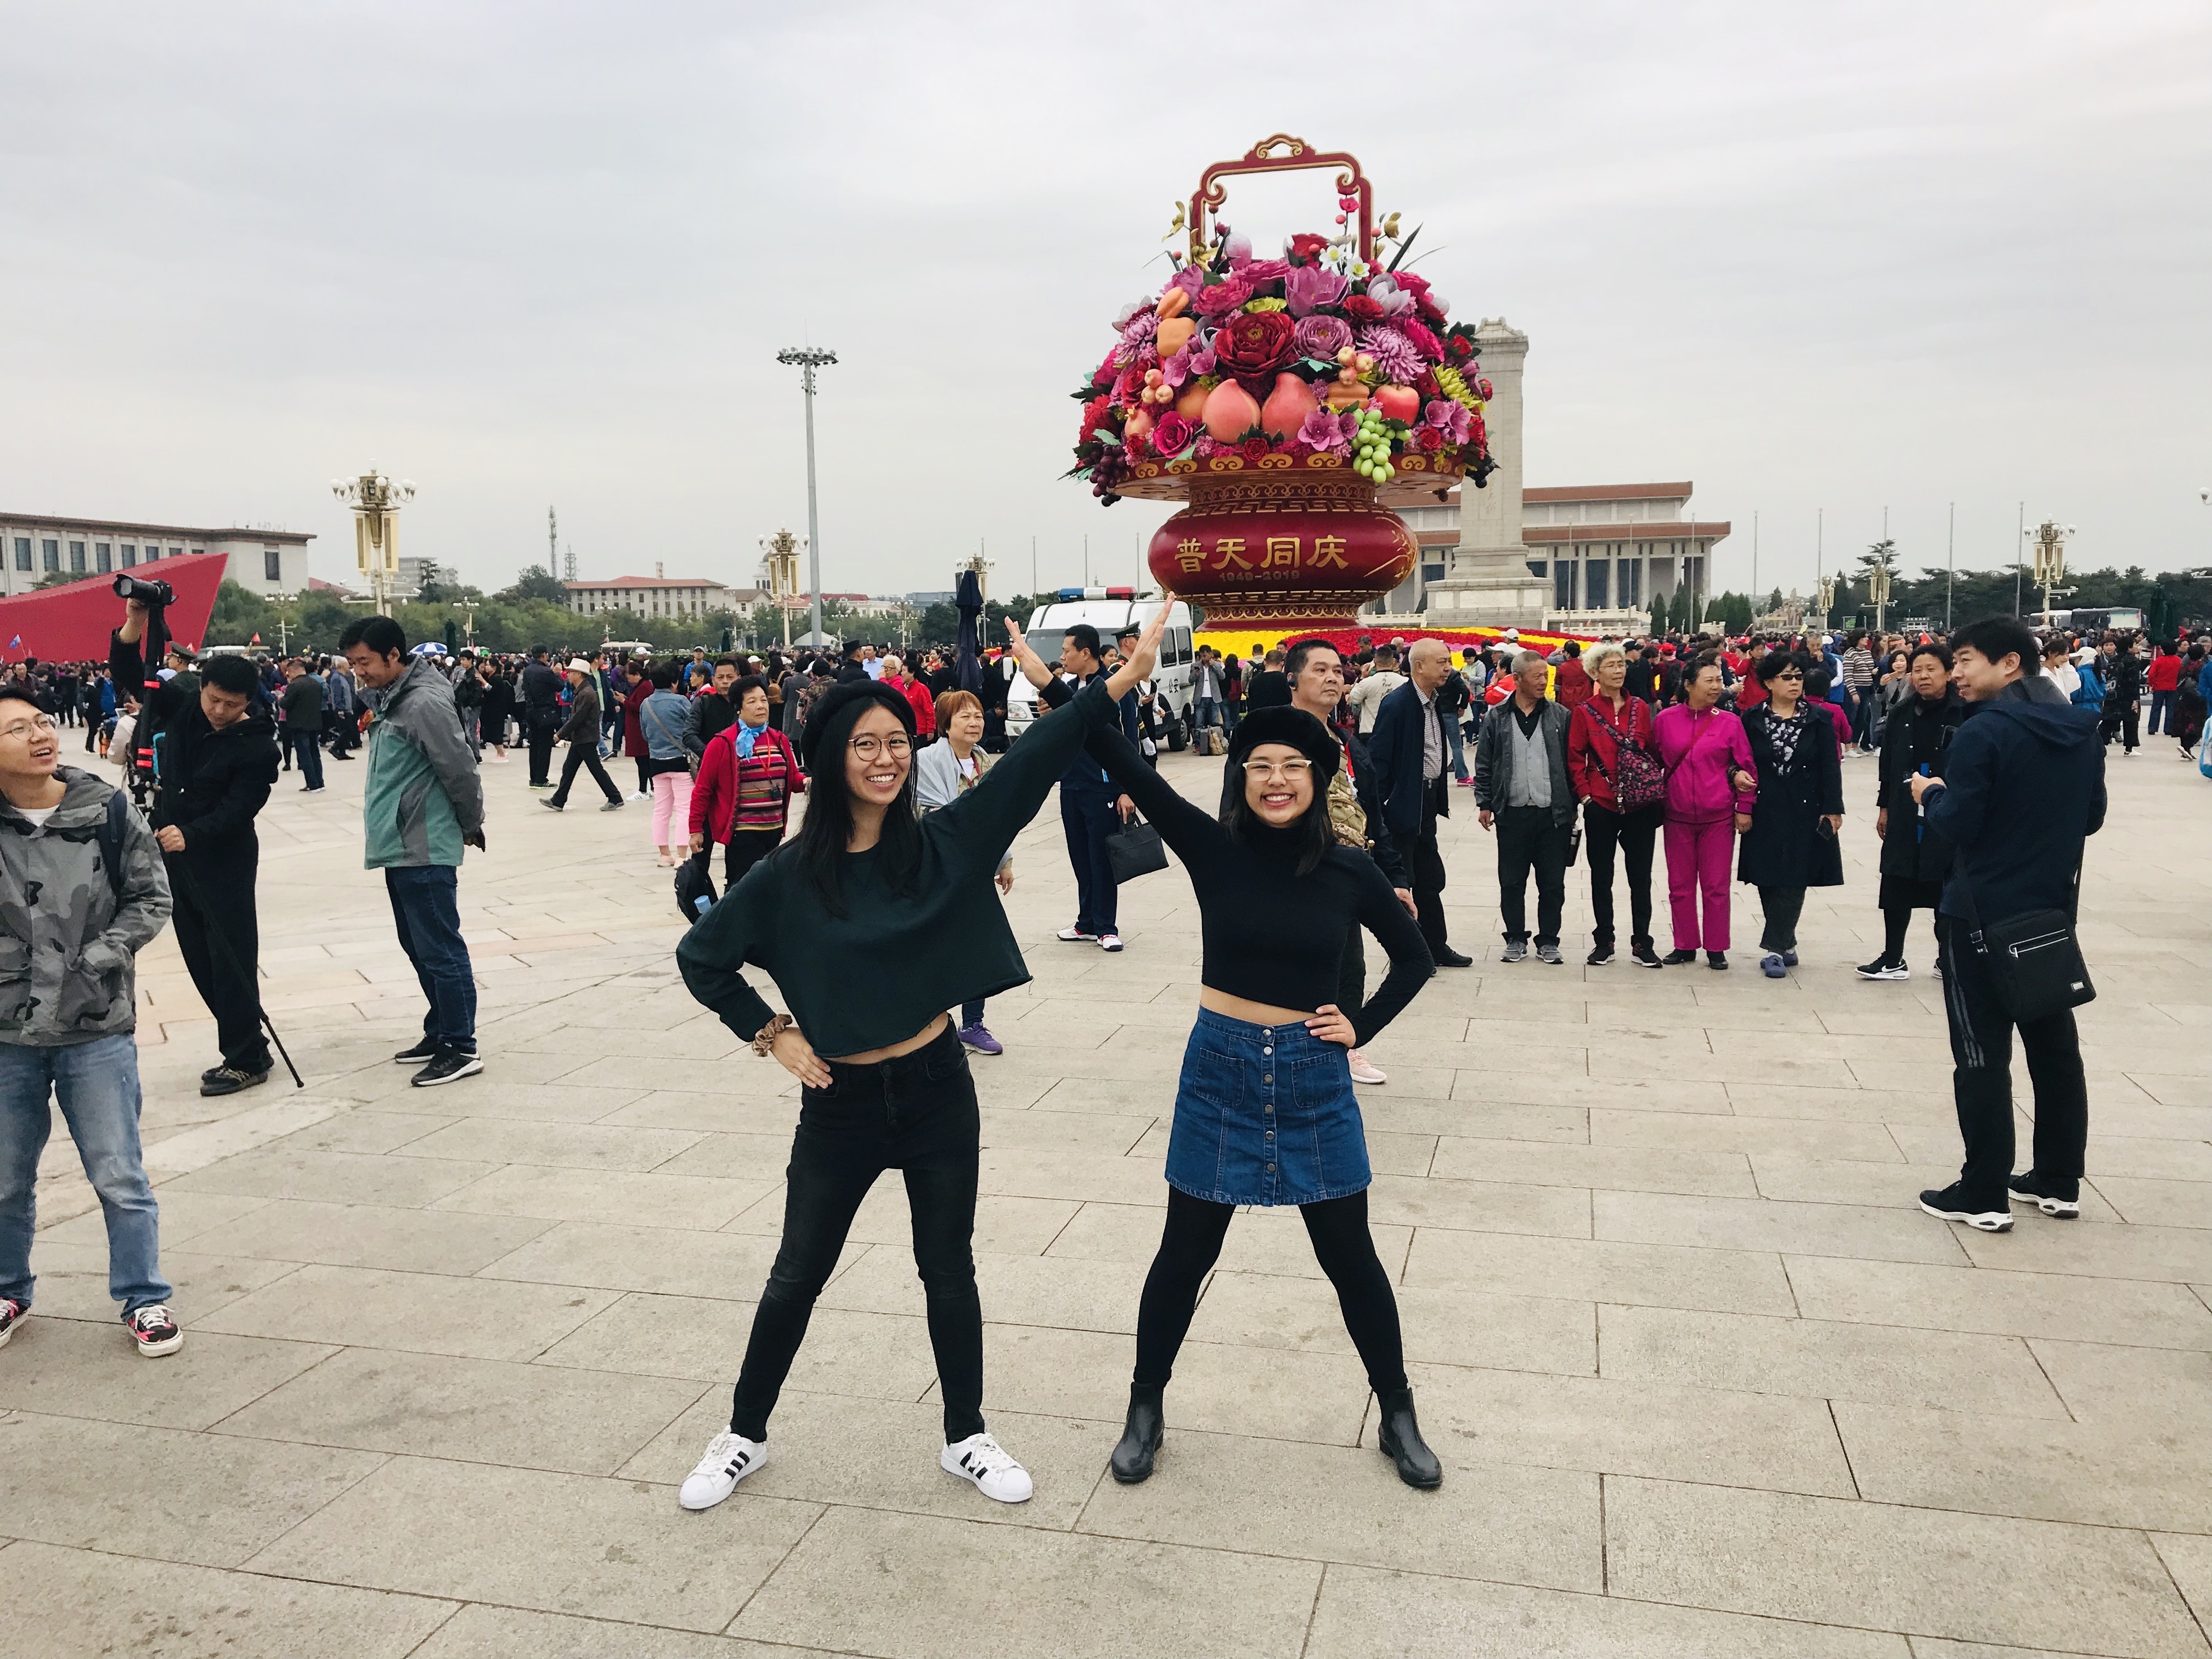 Sarah and I in Tiananmen posing with a large display of flowers behind us.